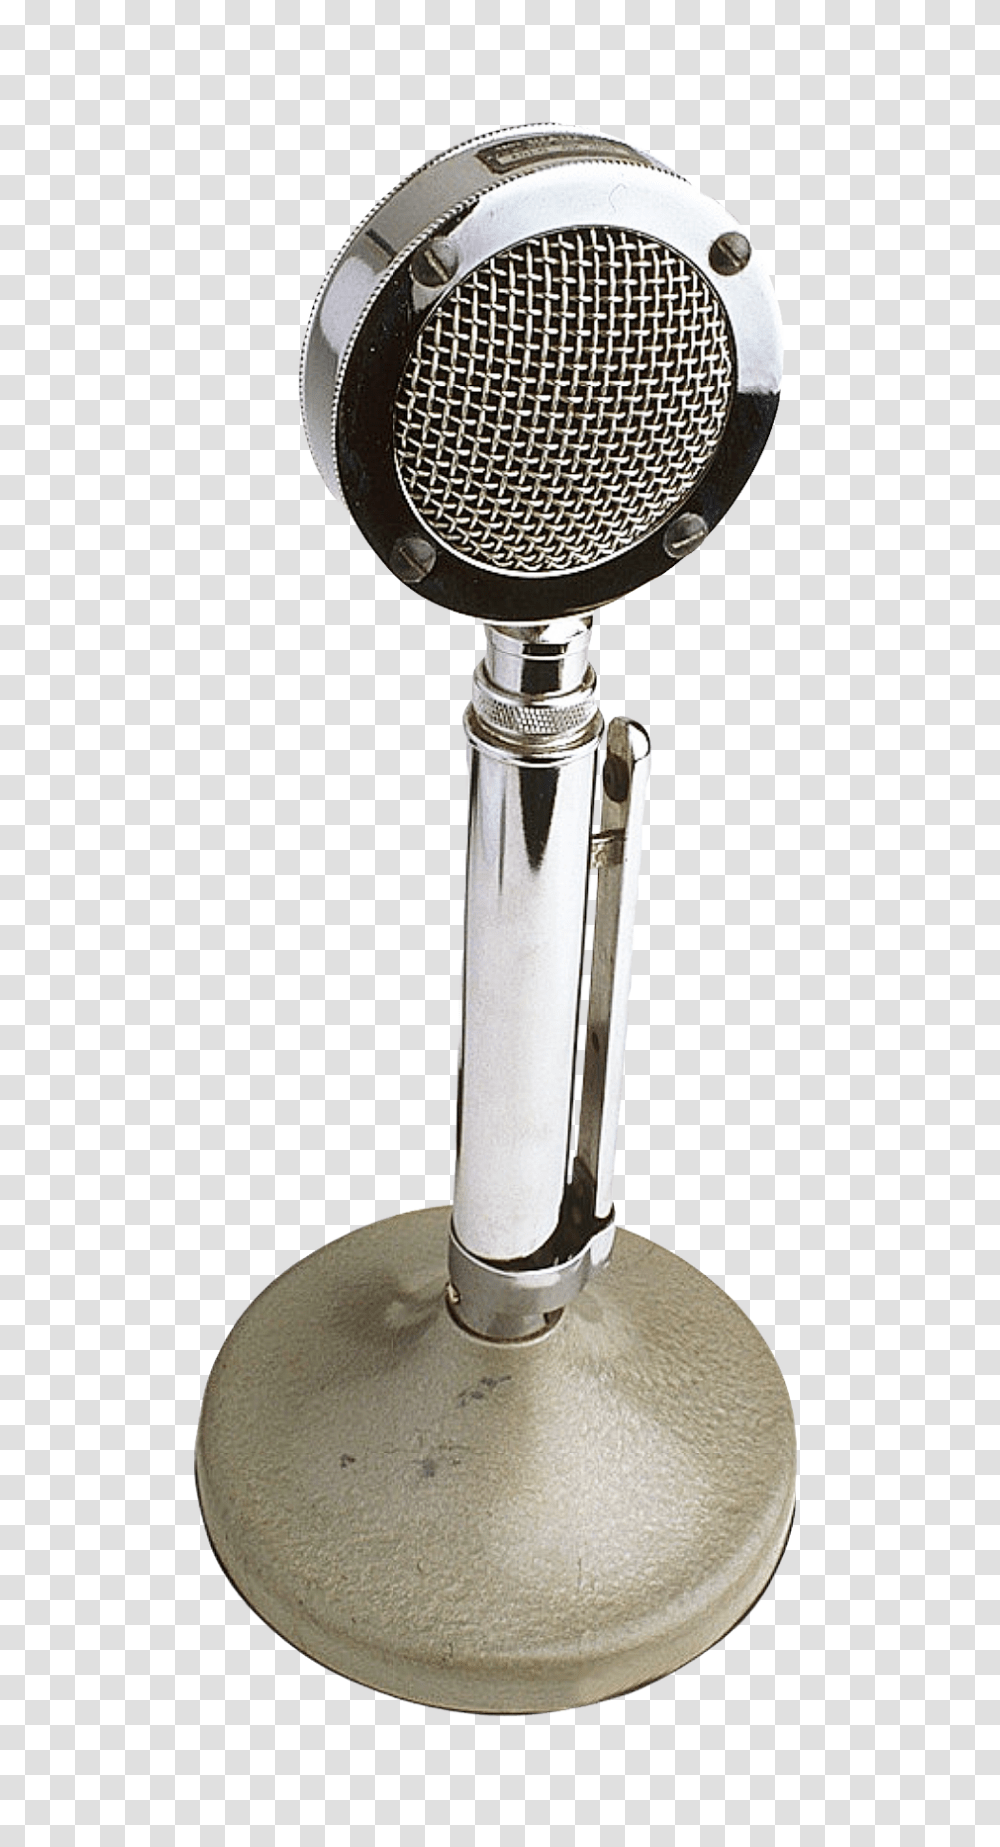 Microphone Image Purepng Free Cc0 Microphone, Electrical Device, Indoors, Room Transparent Png